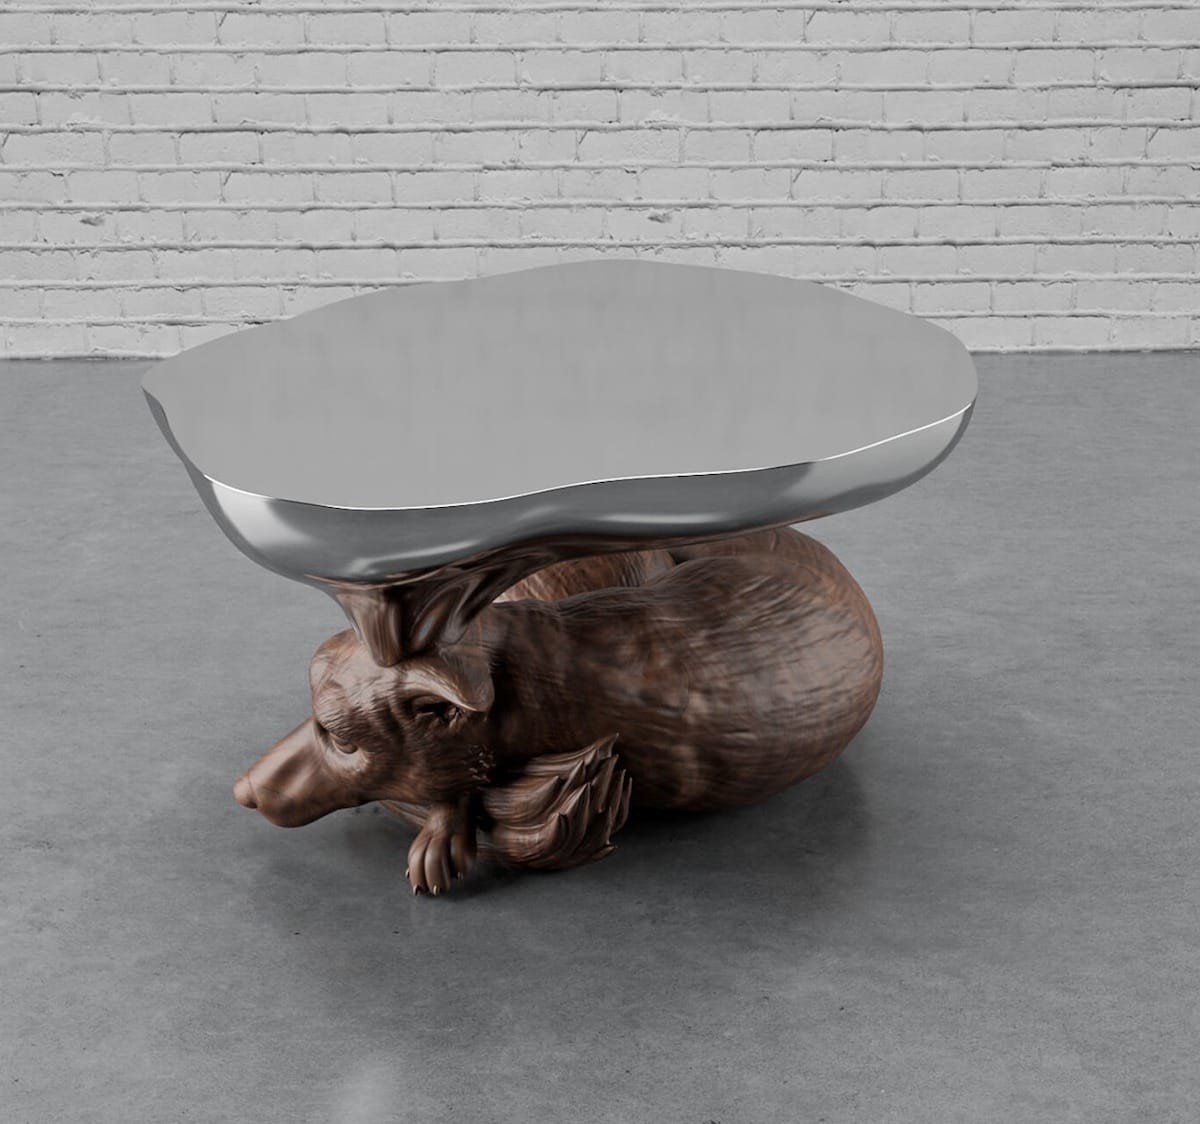 Mousarris Dreaming Fox unique coffee table uses CNC technology to capture details